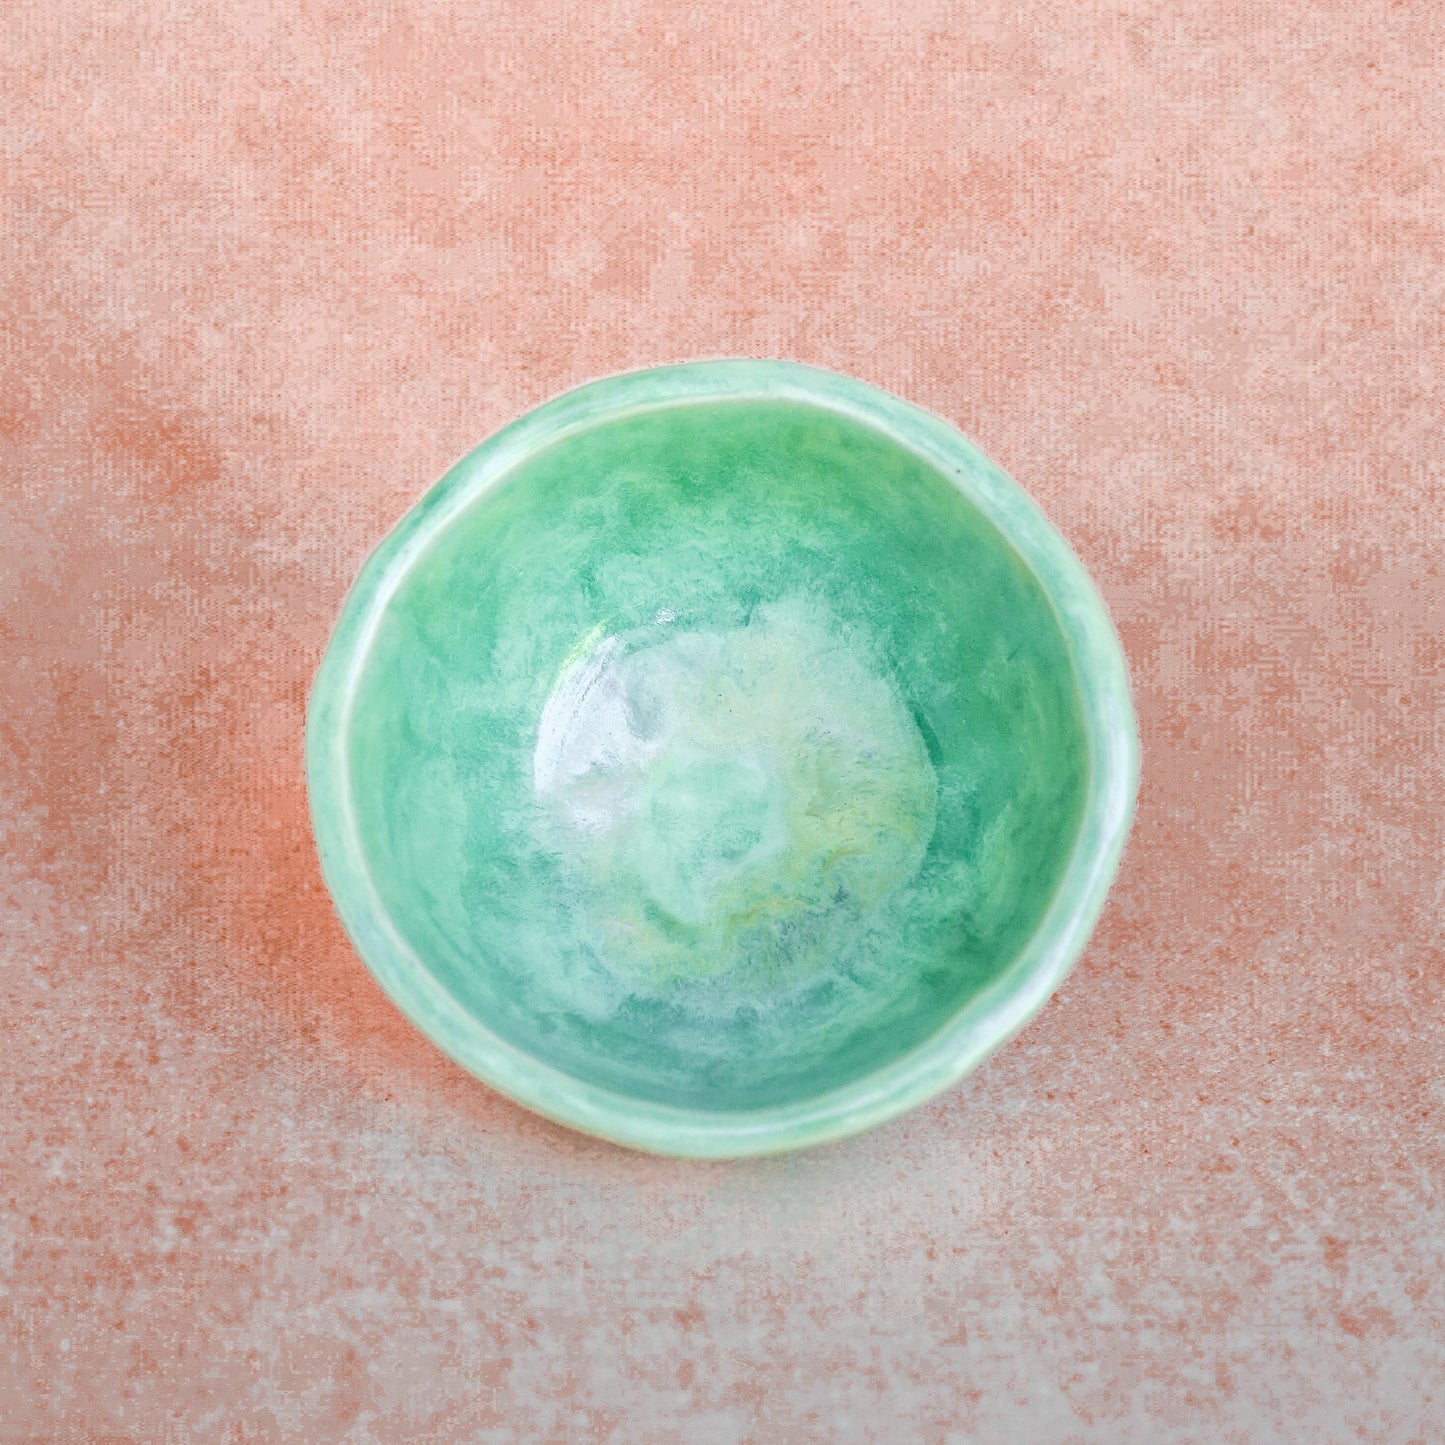 The Jade Matcha Bowl-Preorder Now